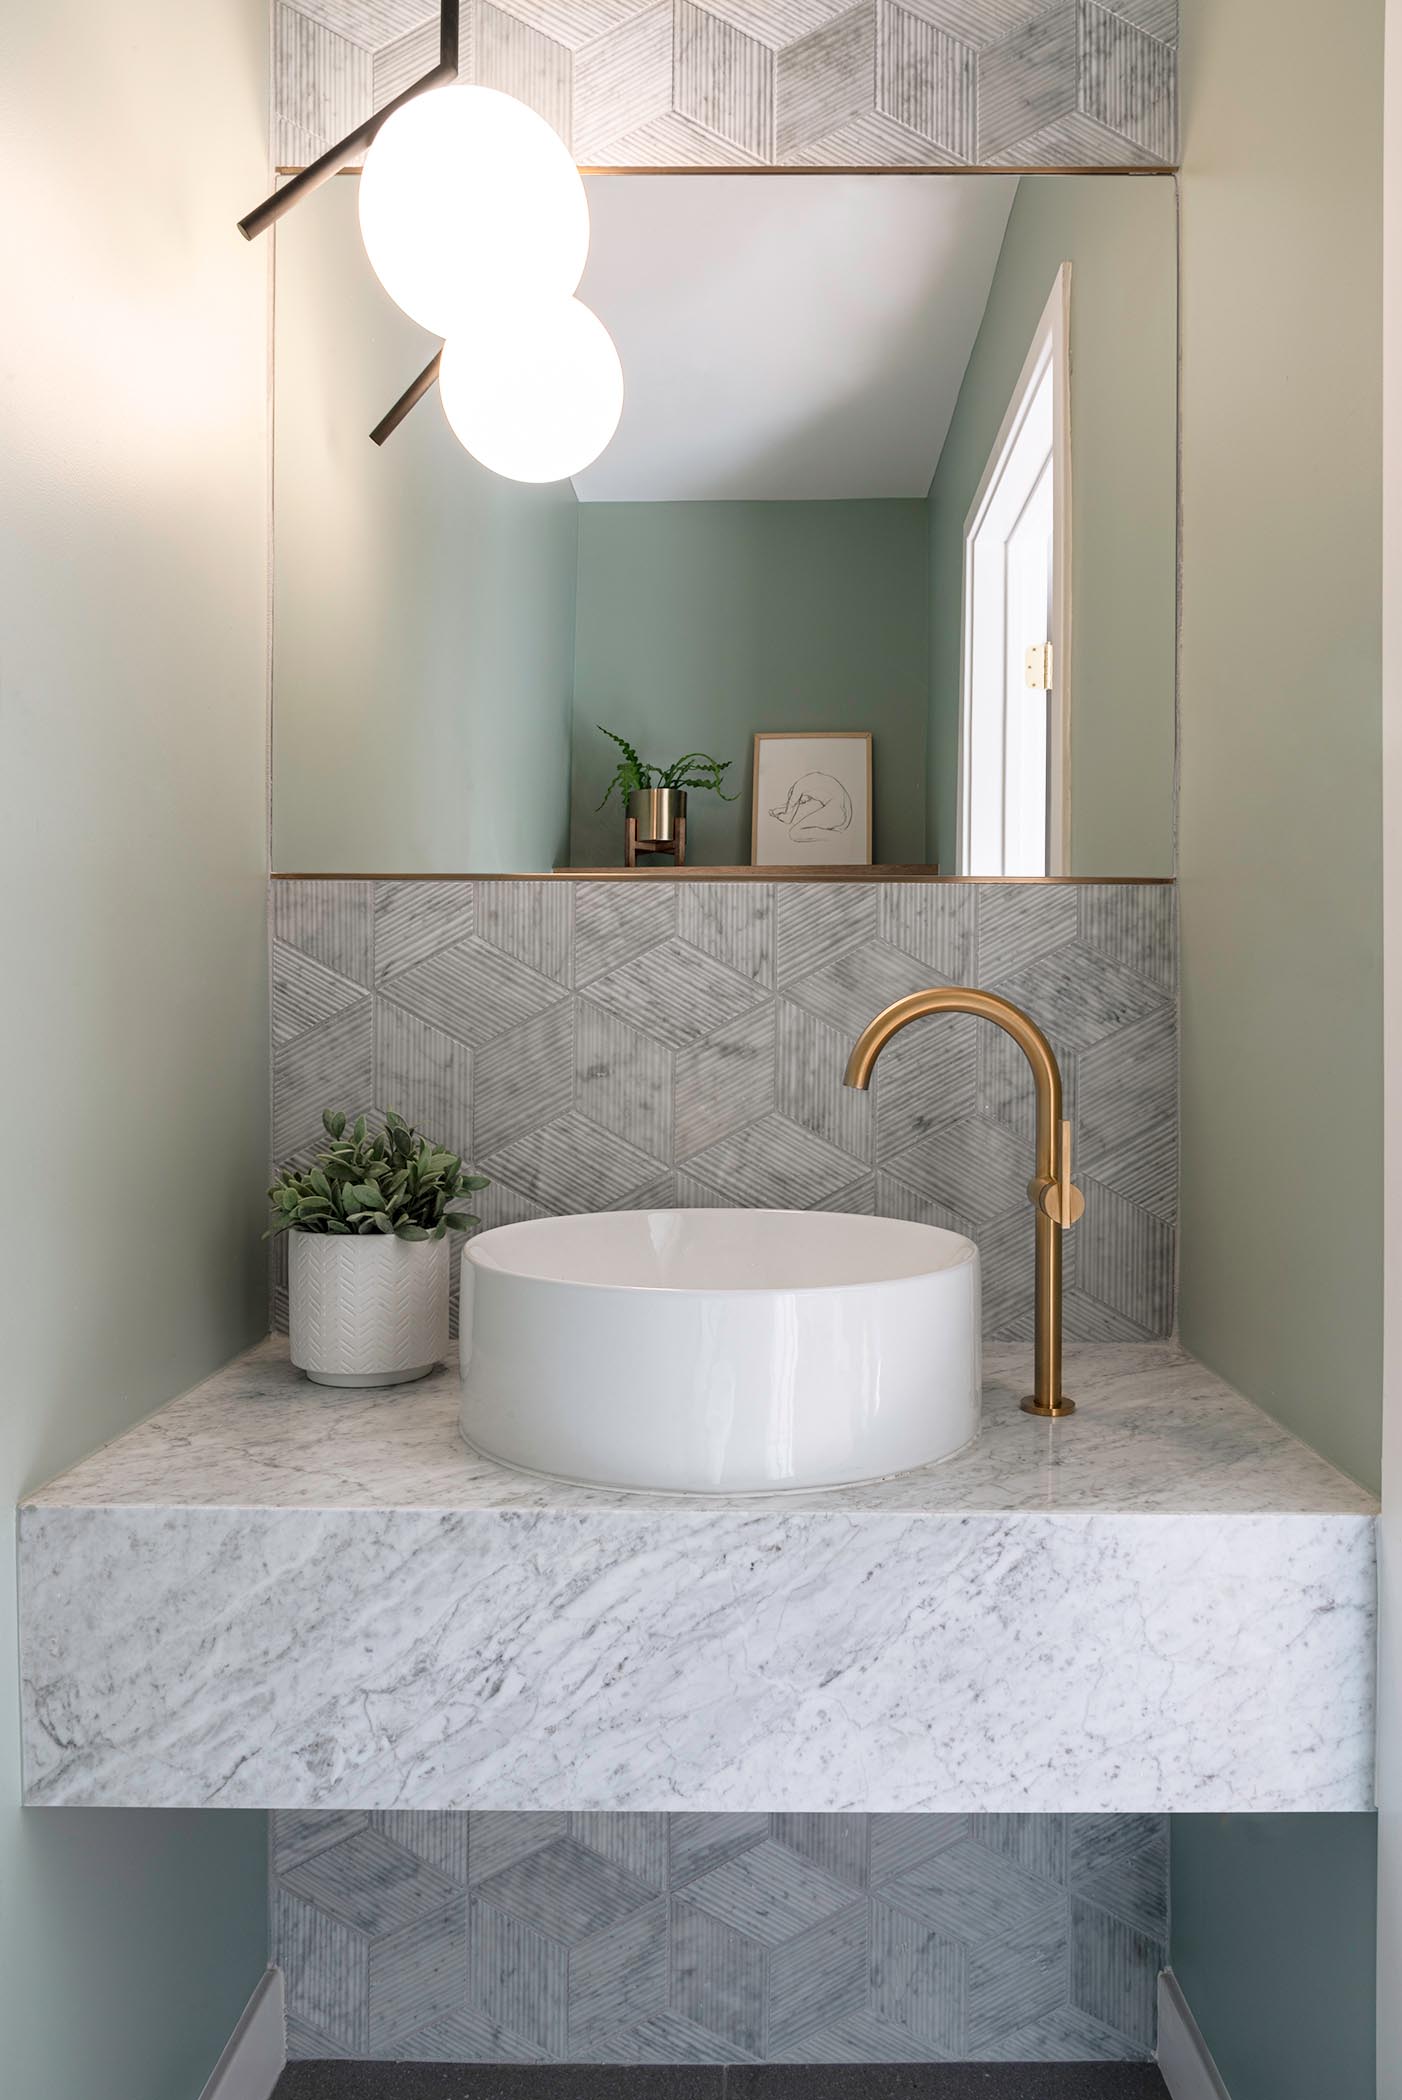 In this small but modern powder room, tile with a textural bamboo-like finish covers the wall, while a floating vanity is topped with a round white vessel sink and bronze accents.